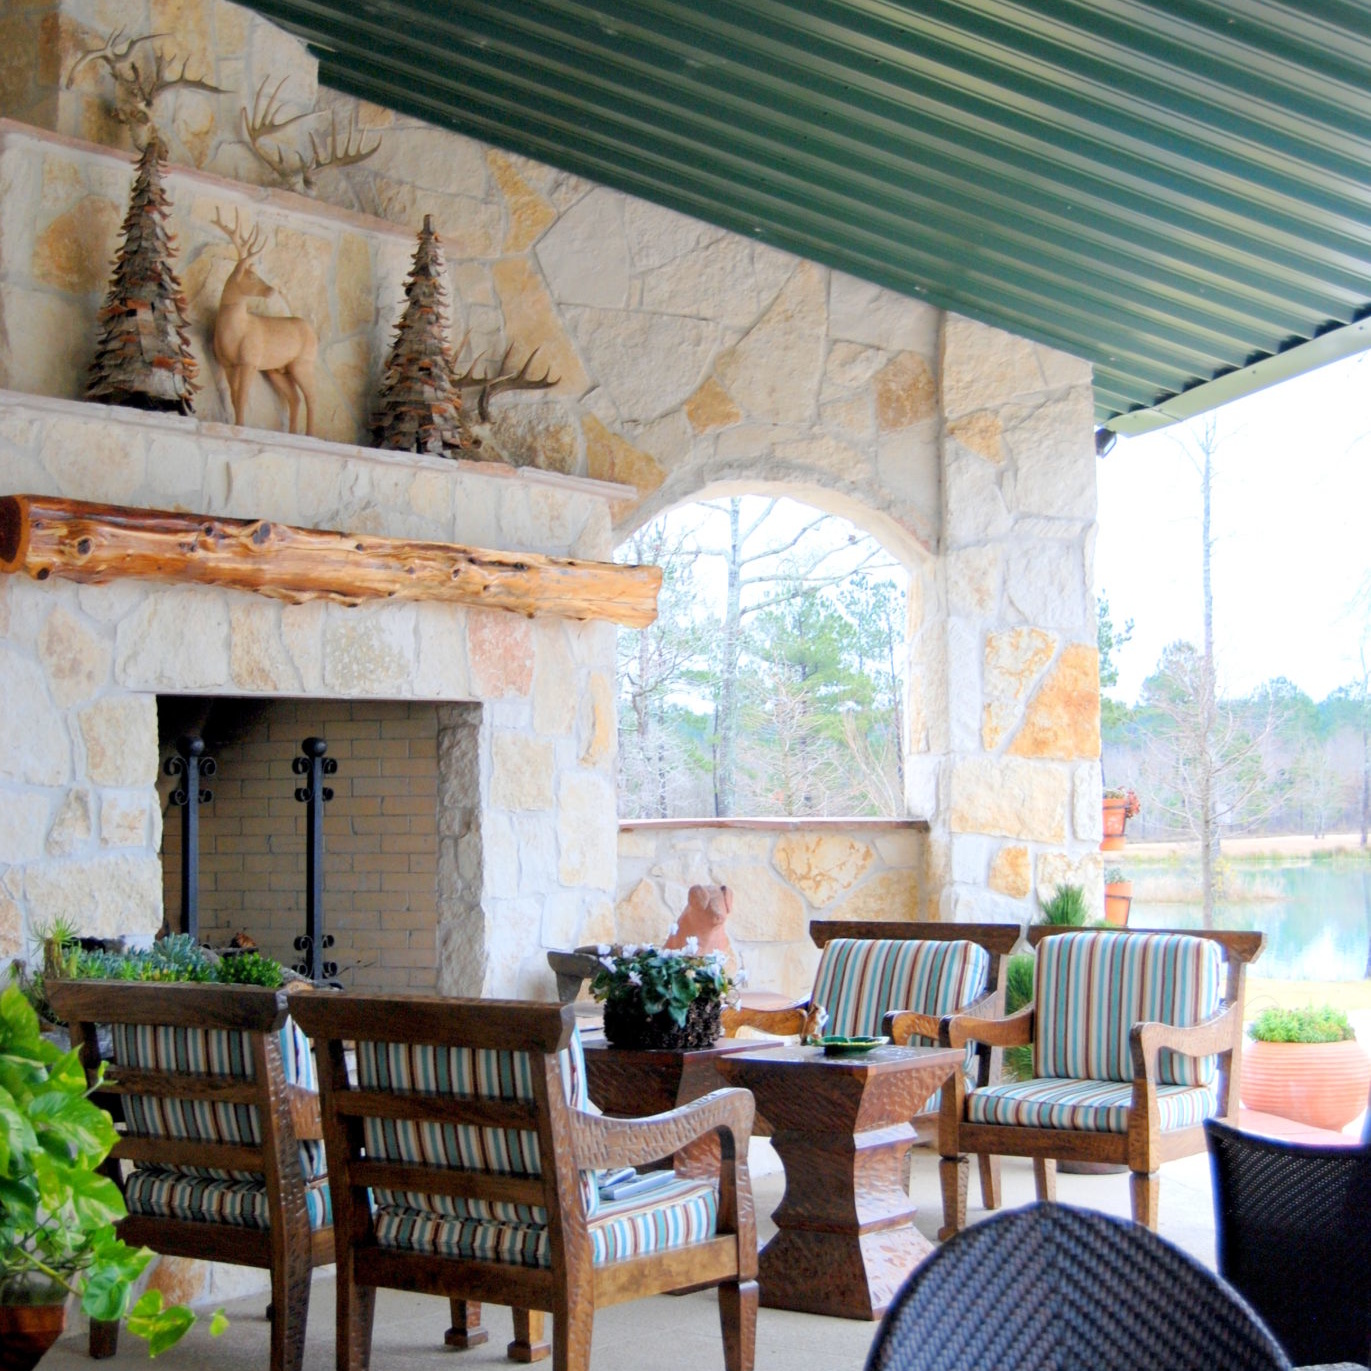 Patio design with a fireplace